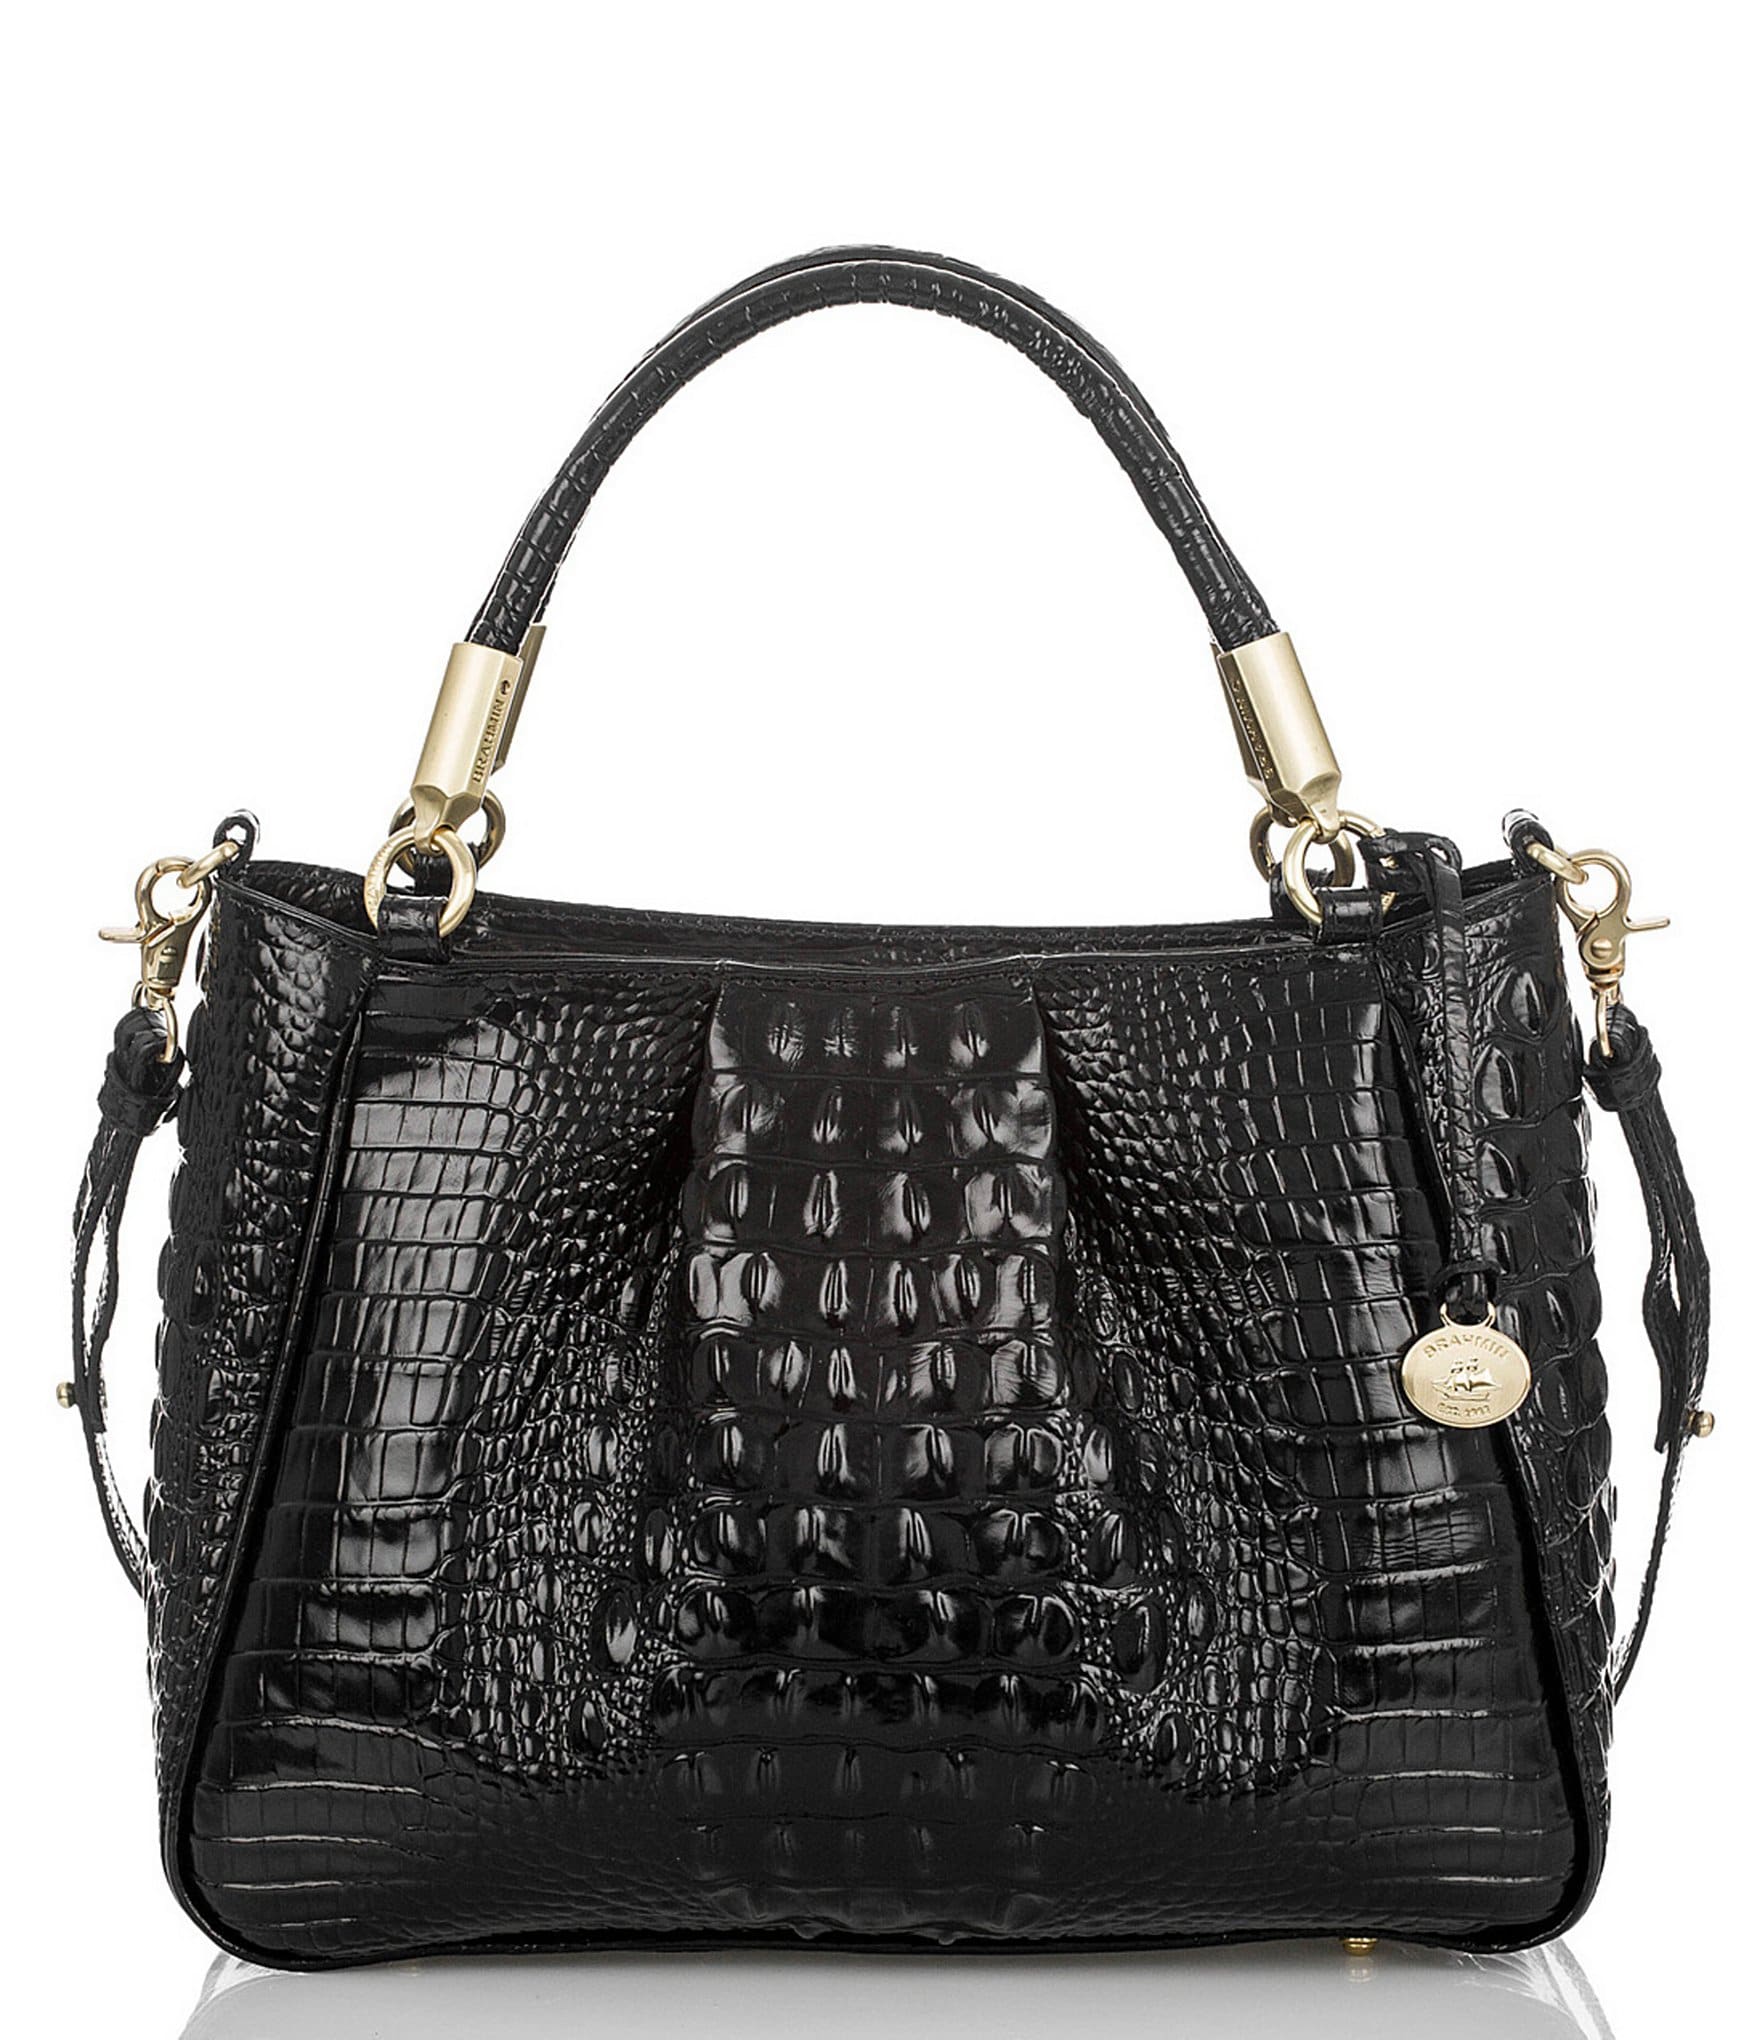 Dillards Black Leather Handbags | Confederated Tribes of the Umatilla Indian Reservation